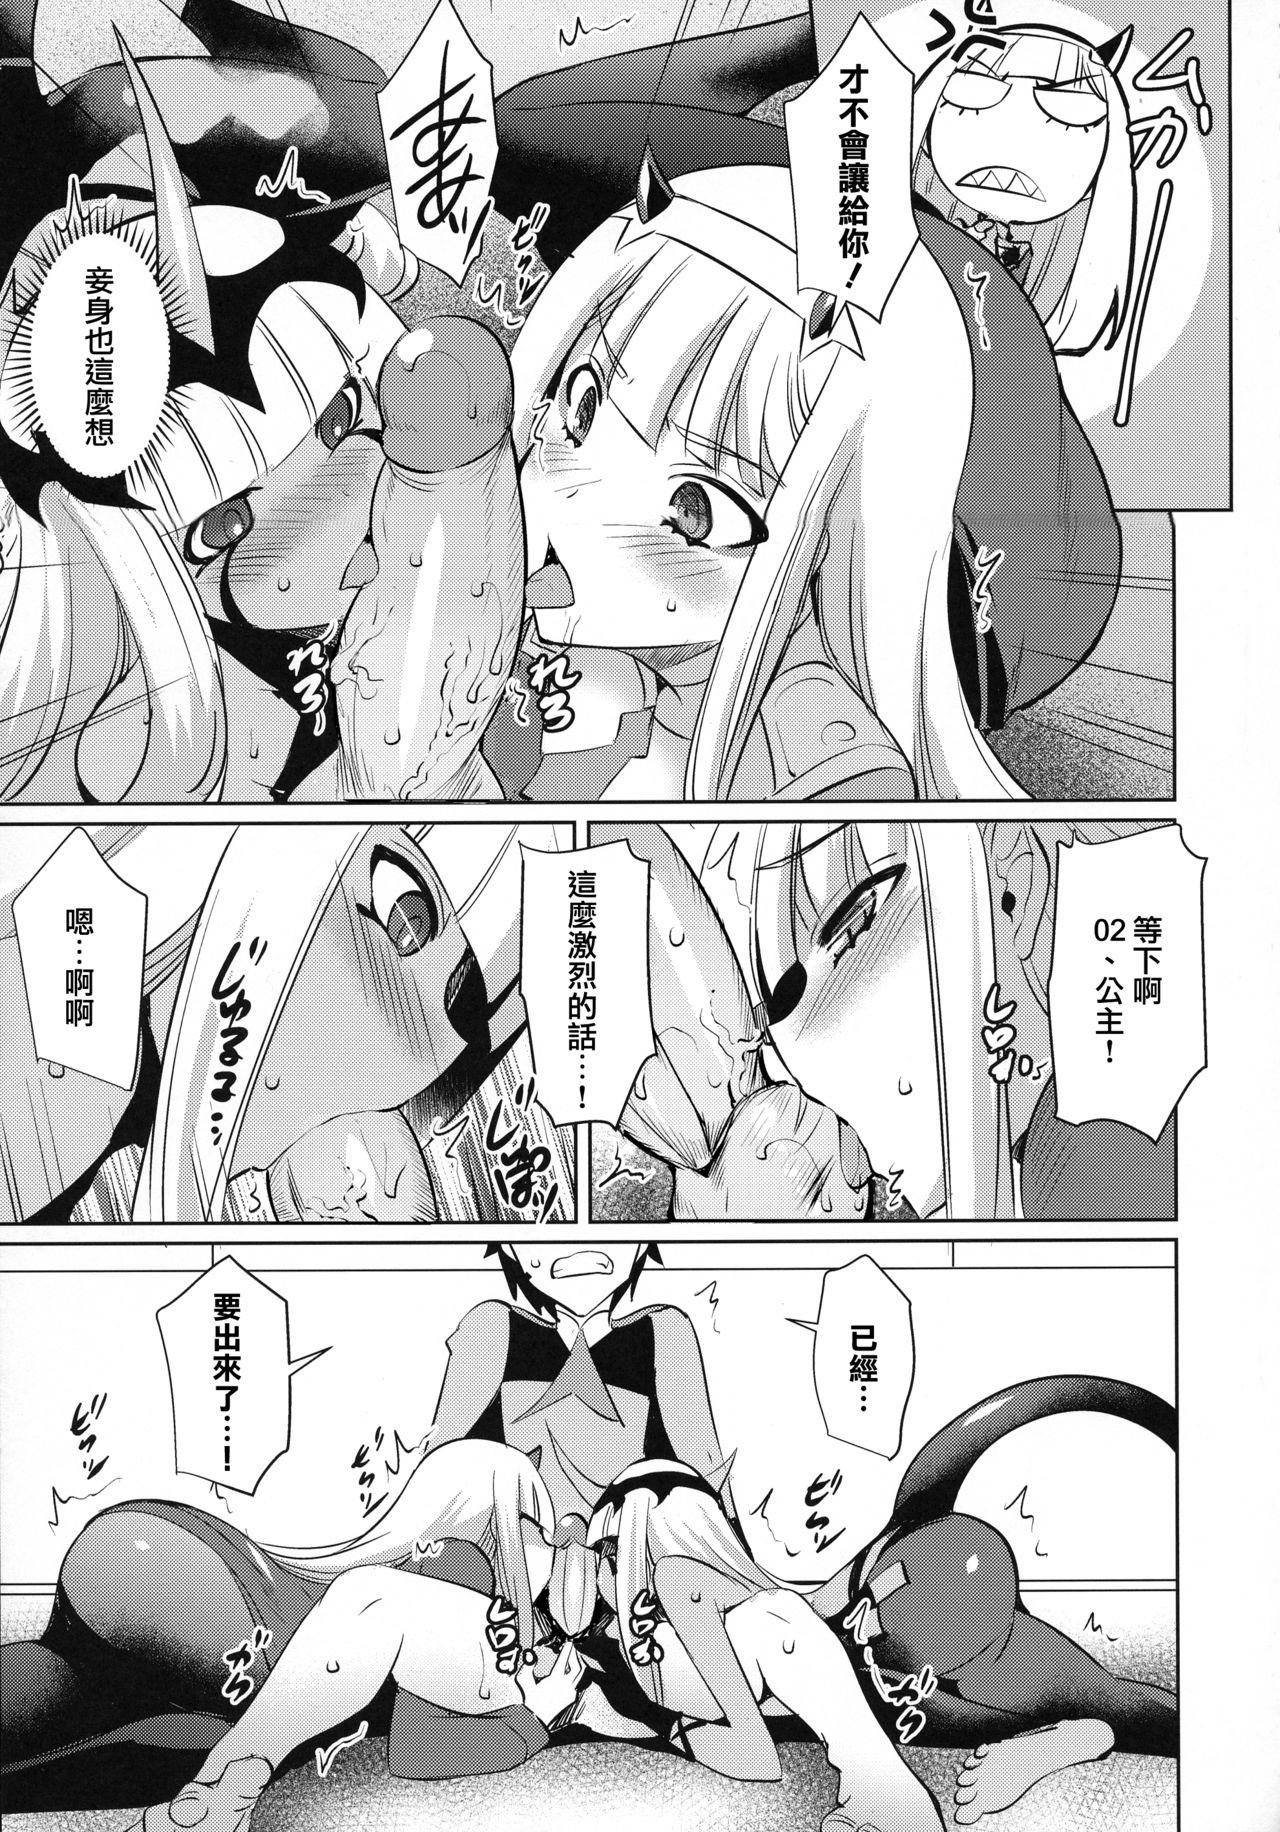 Village Darling in the One and Two - Darling in the franxx Passivo - Page 8